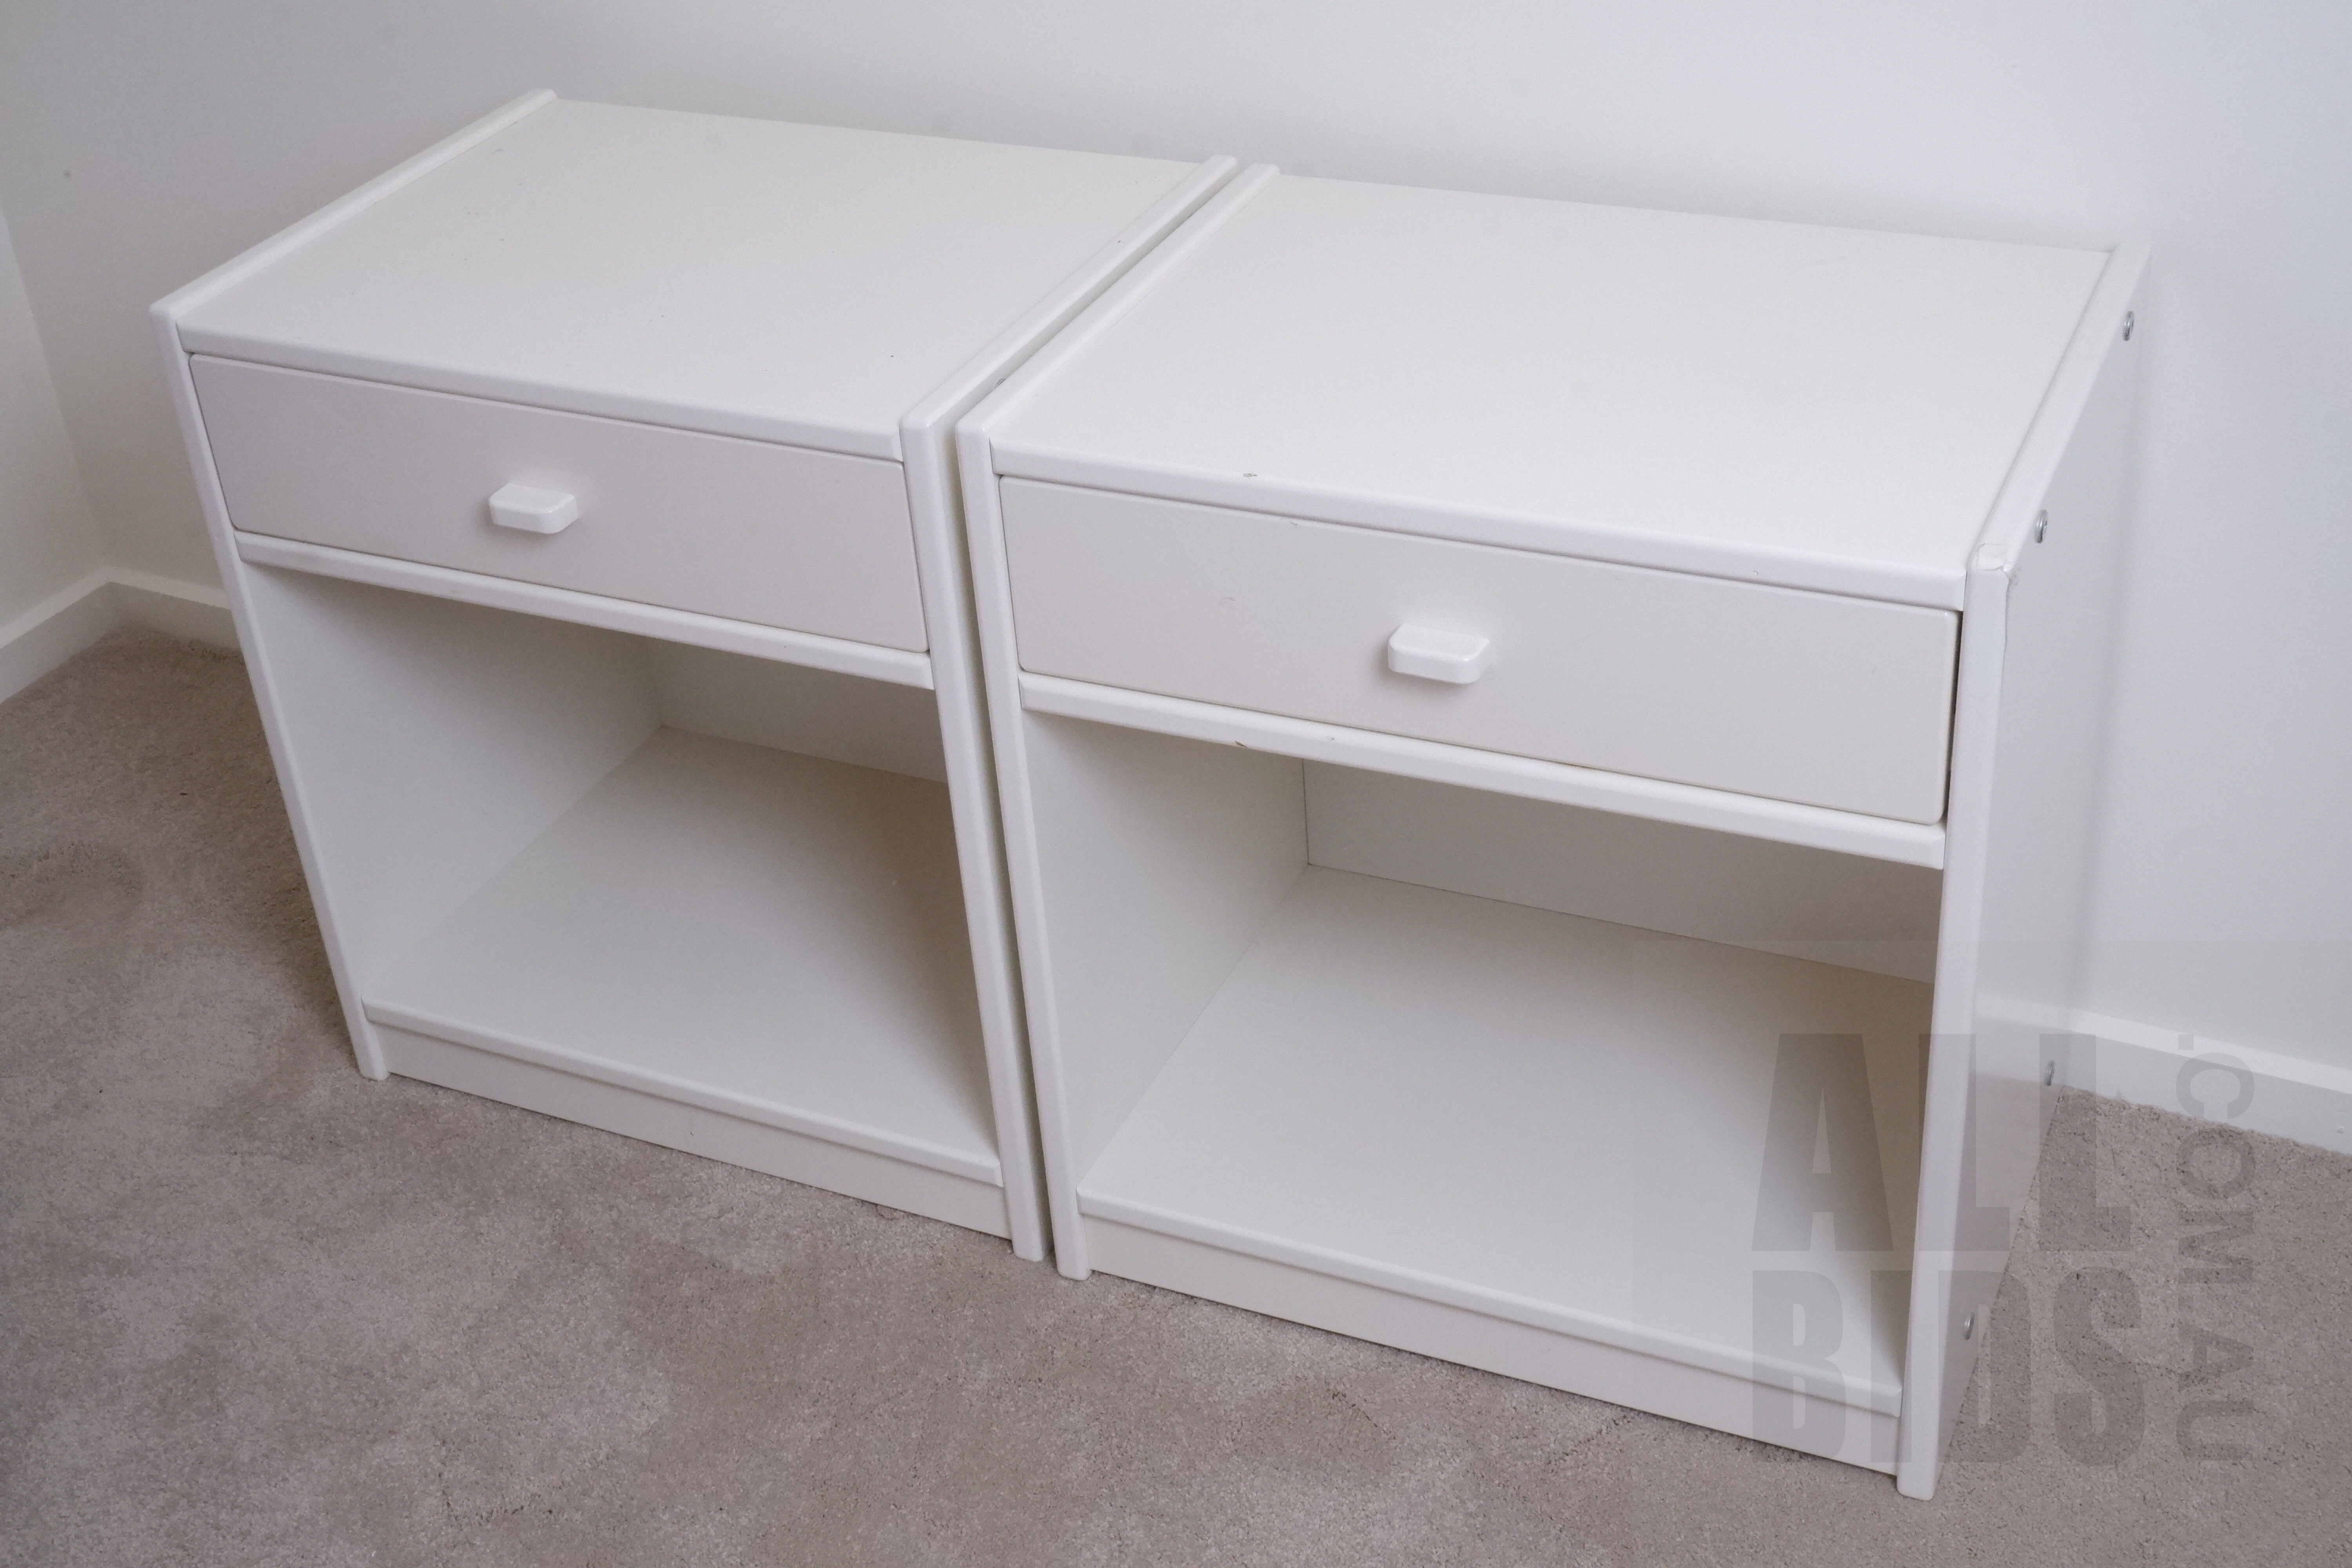 'Pair of Contemporary White Bedside Cabinets'